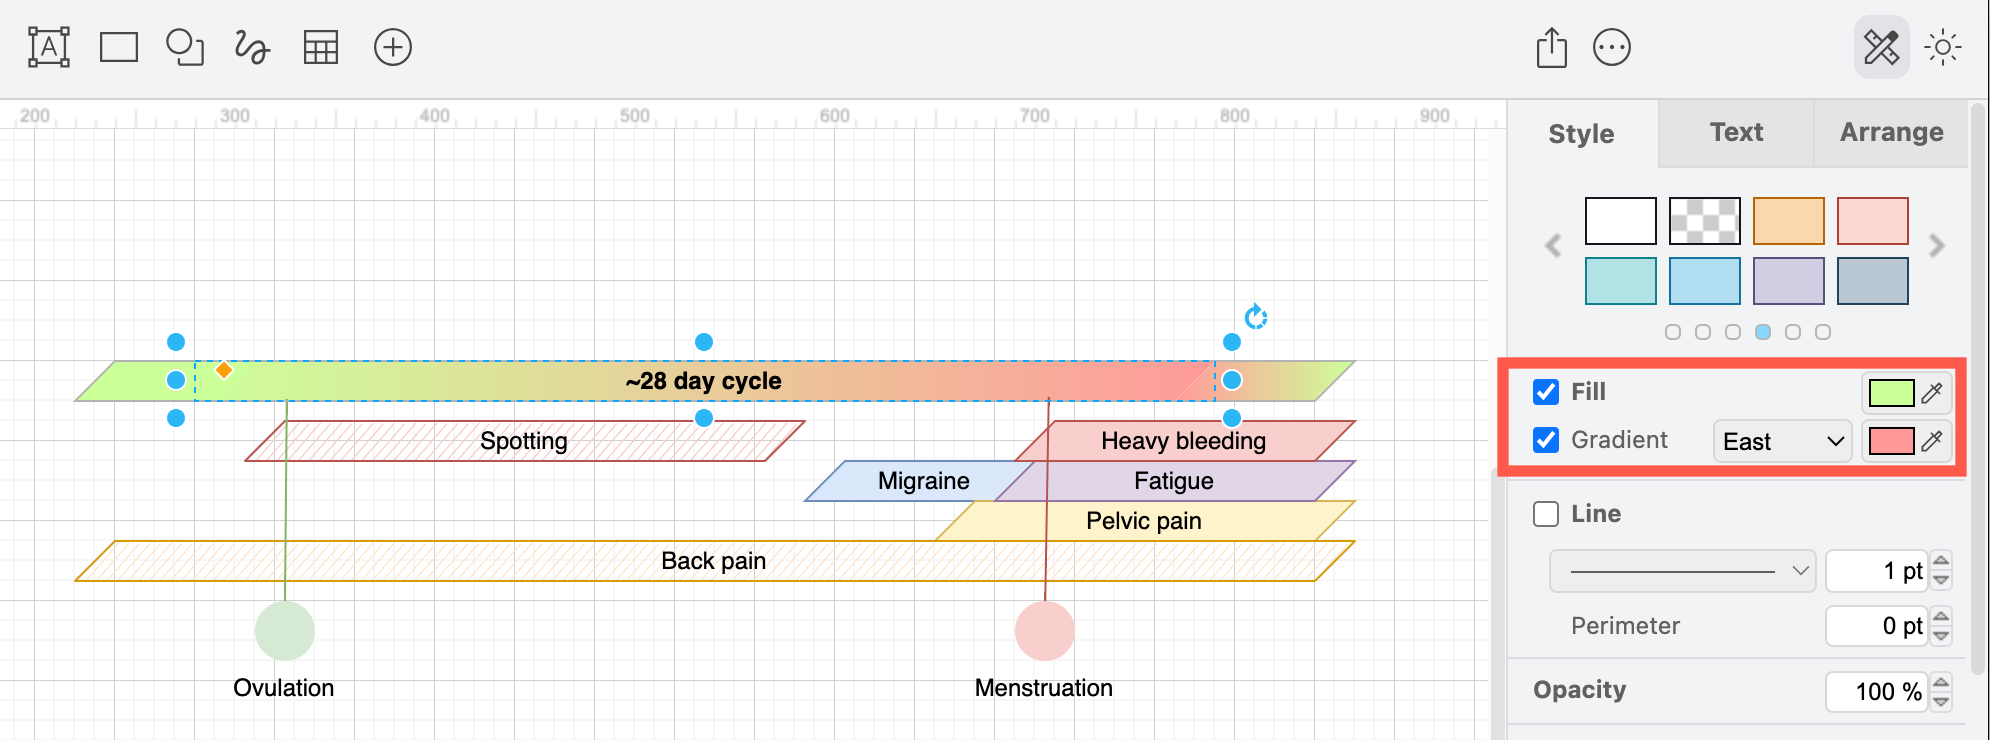 Draw a cyclic timeline to show symptoms that appear on a regular schedule